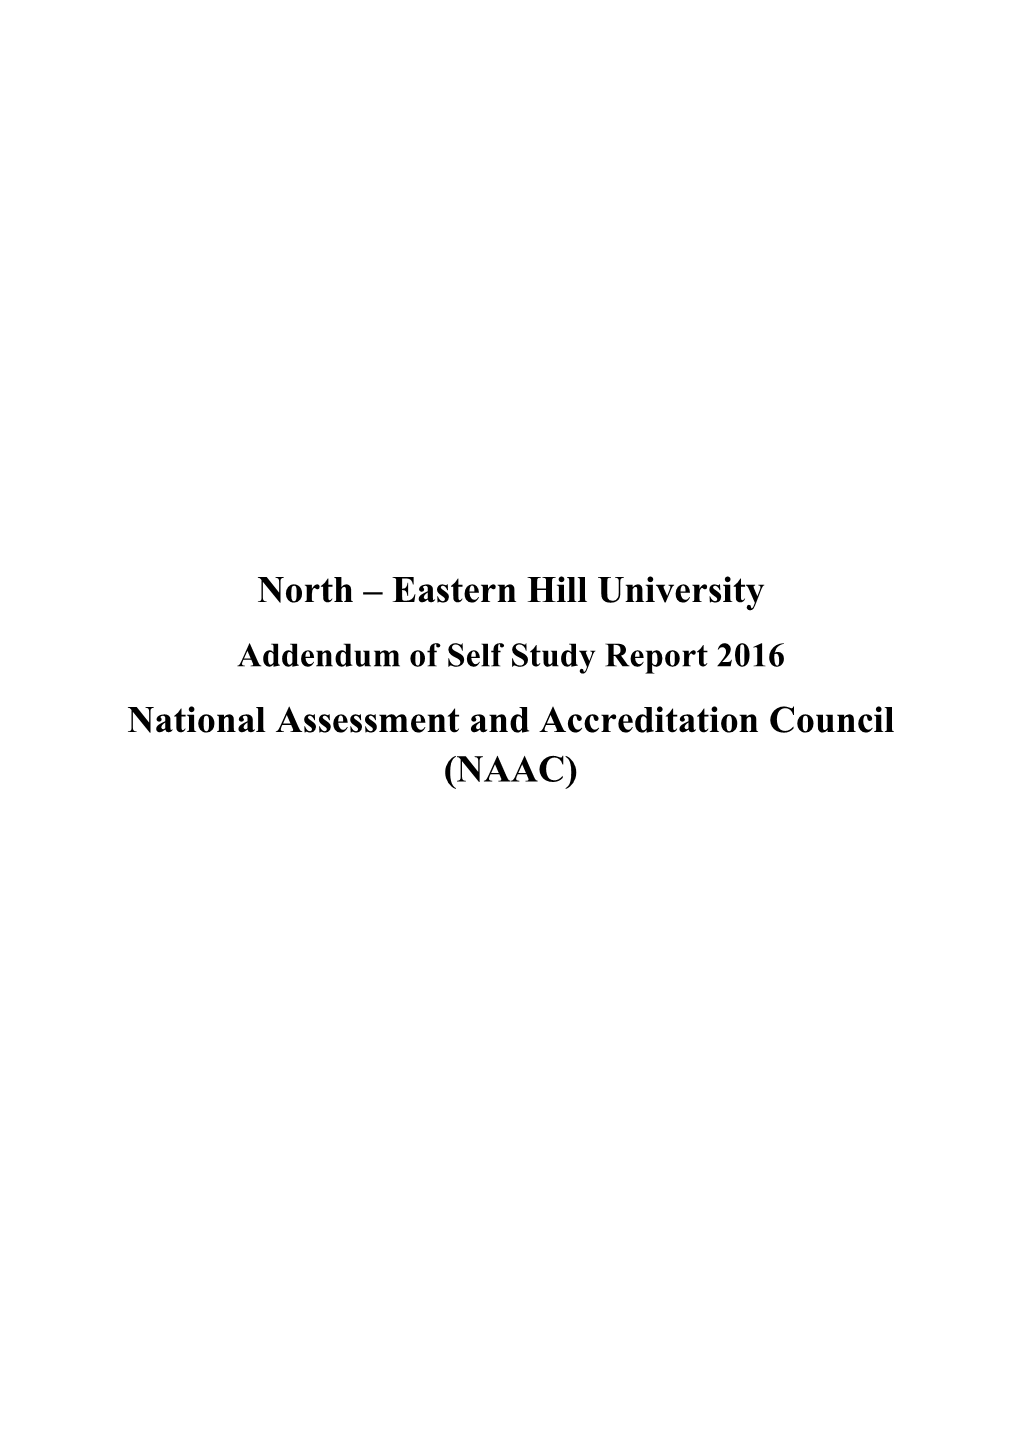 North – Eastern Hill University Addendum of Self Study Report 2016 National Assessment and Accreditation Council (NAAC)